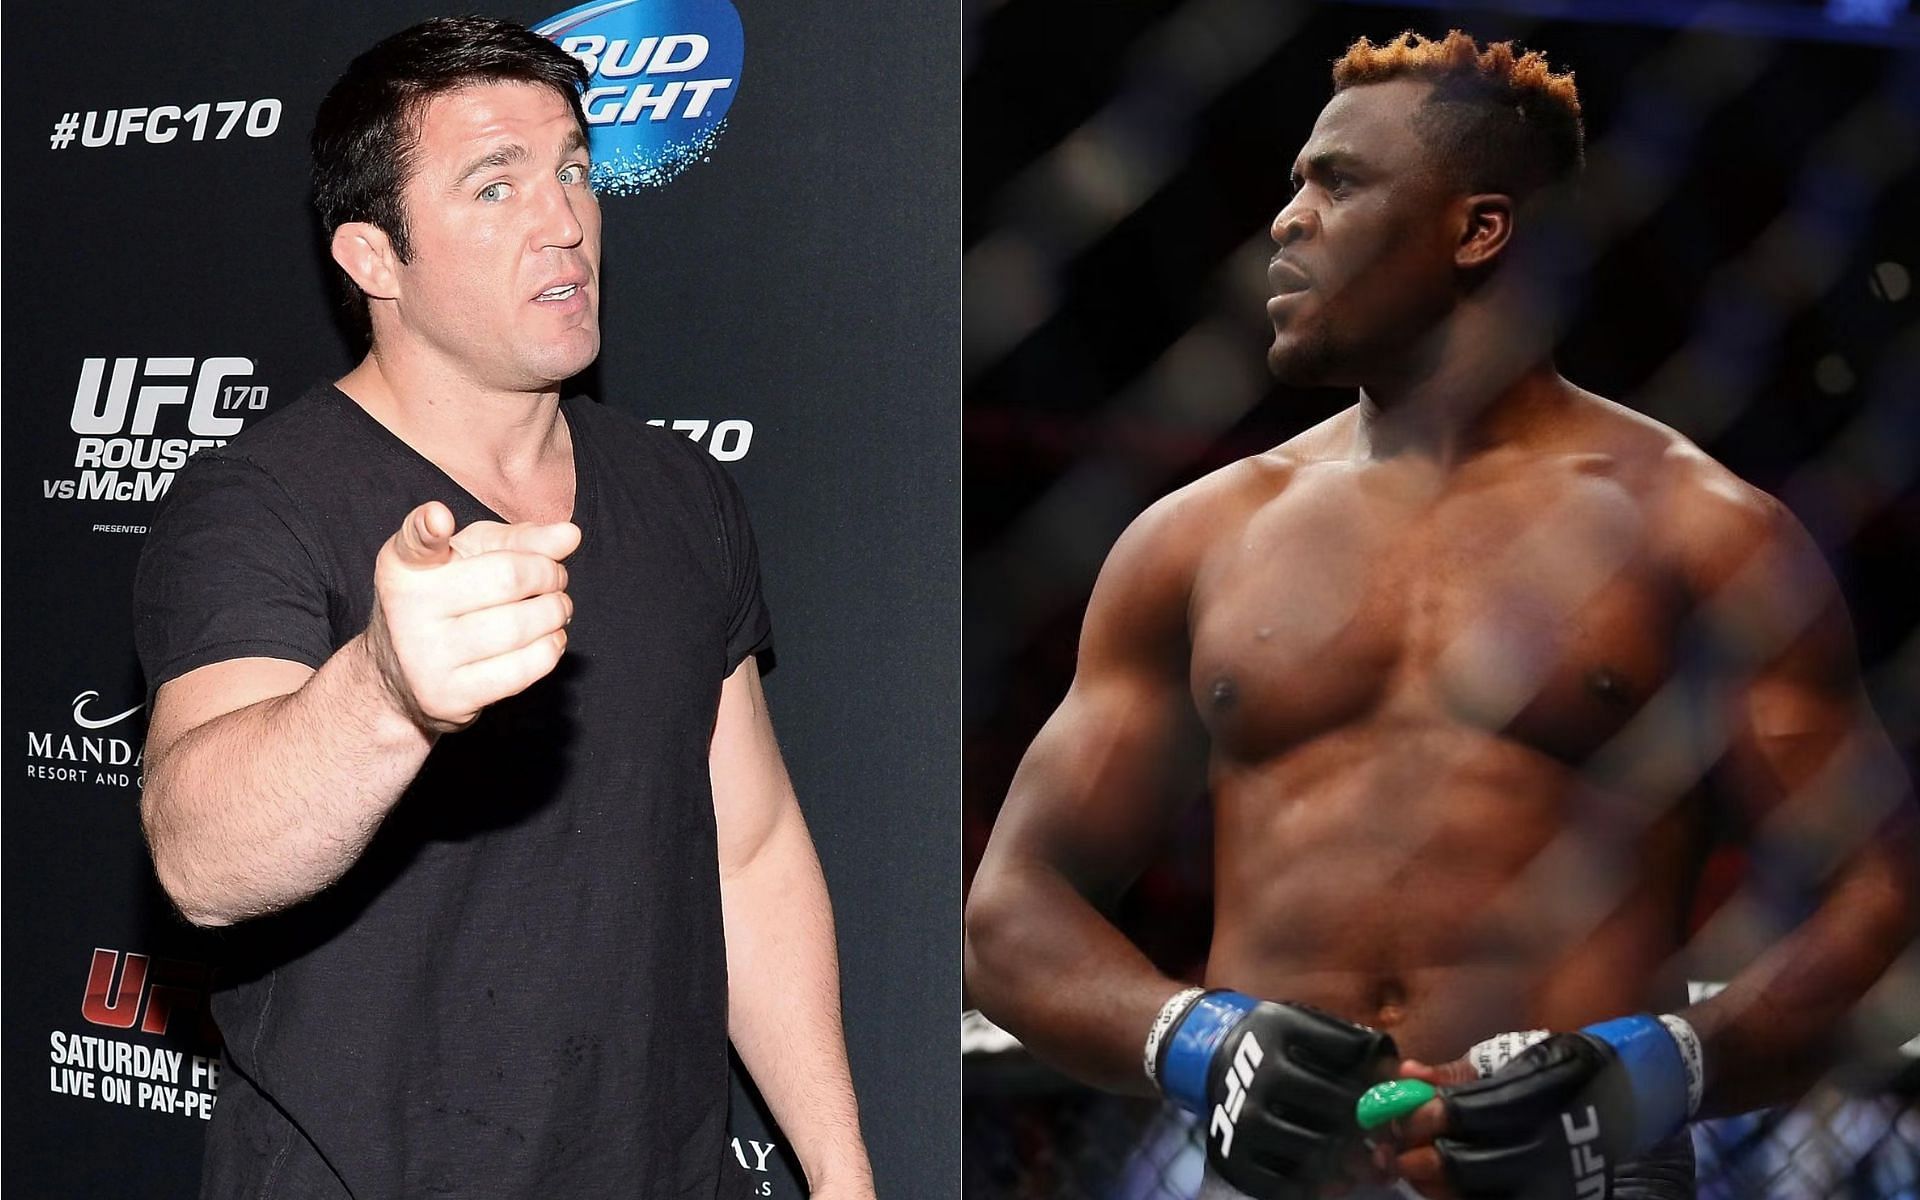 Chael Sonnen (left) and Francis Ngannou (right)